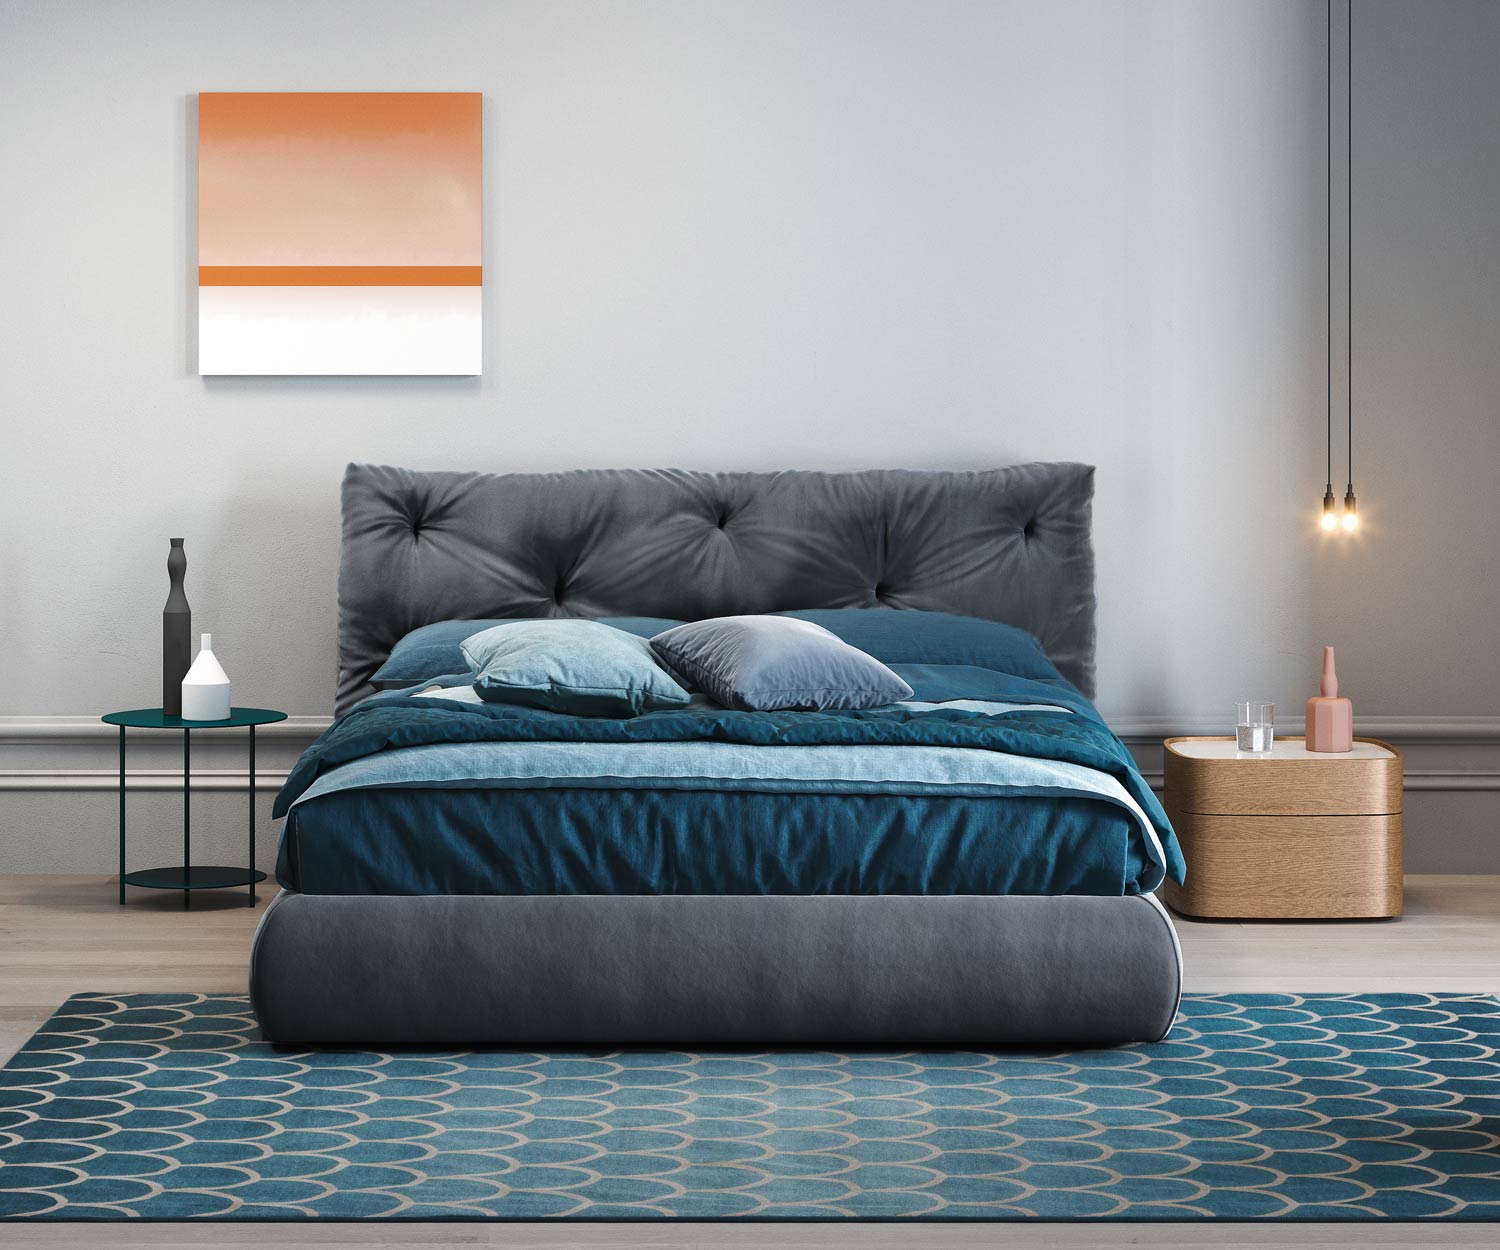 Novamobili Design upholstered bed Modo in a room with an emotional atmosphere